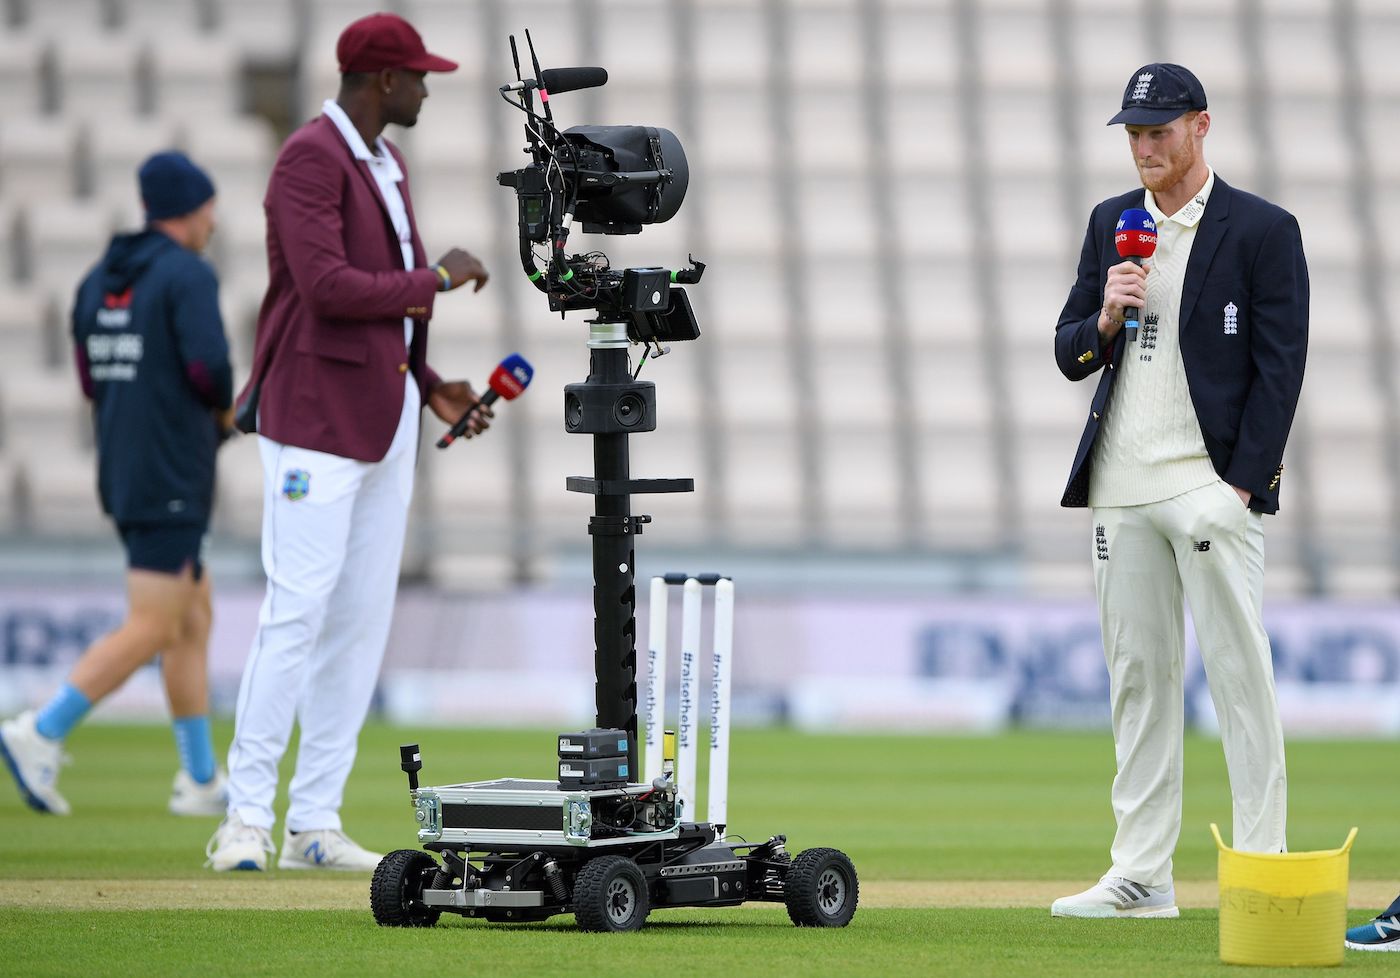 Cricket technology revolution: Hawkeye, Snicko, DRS and more